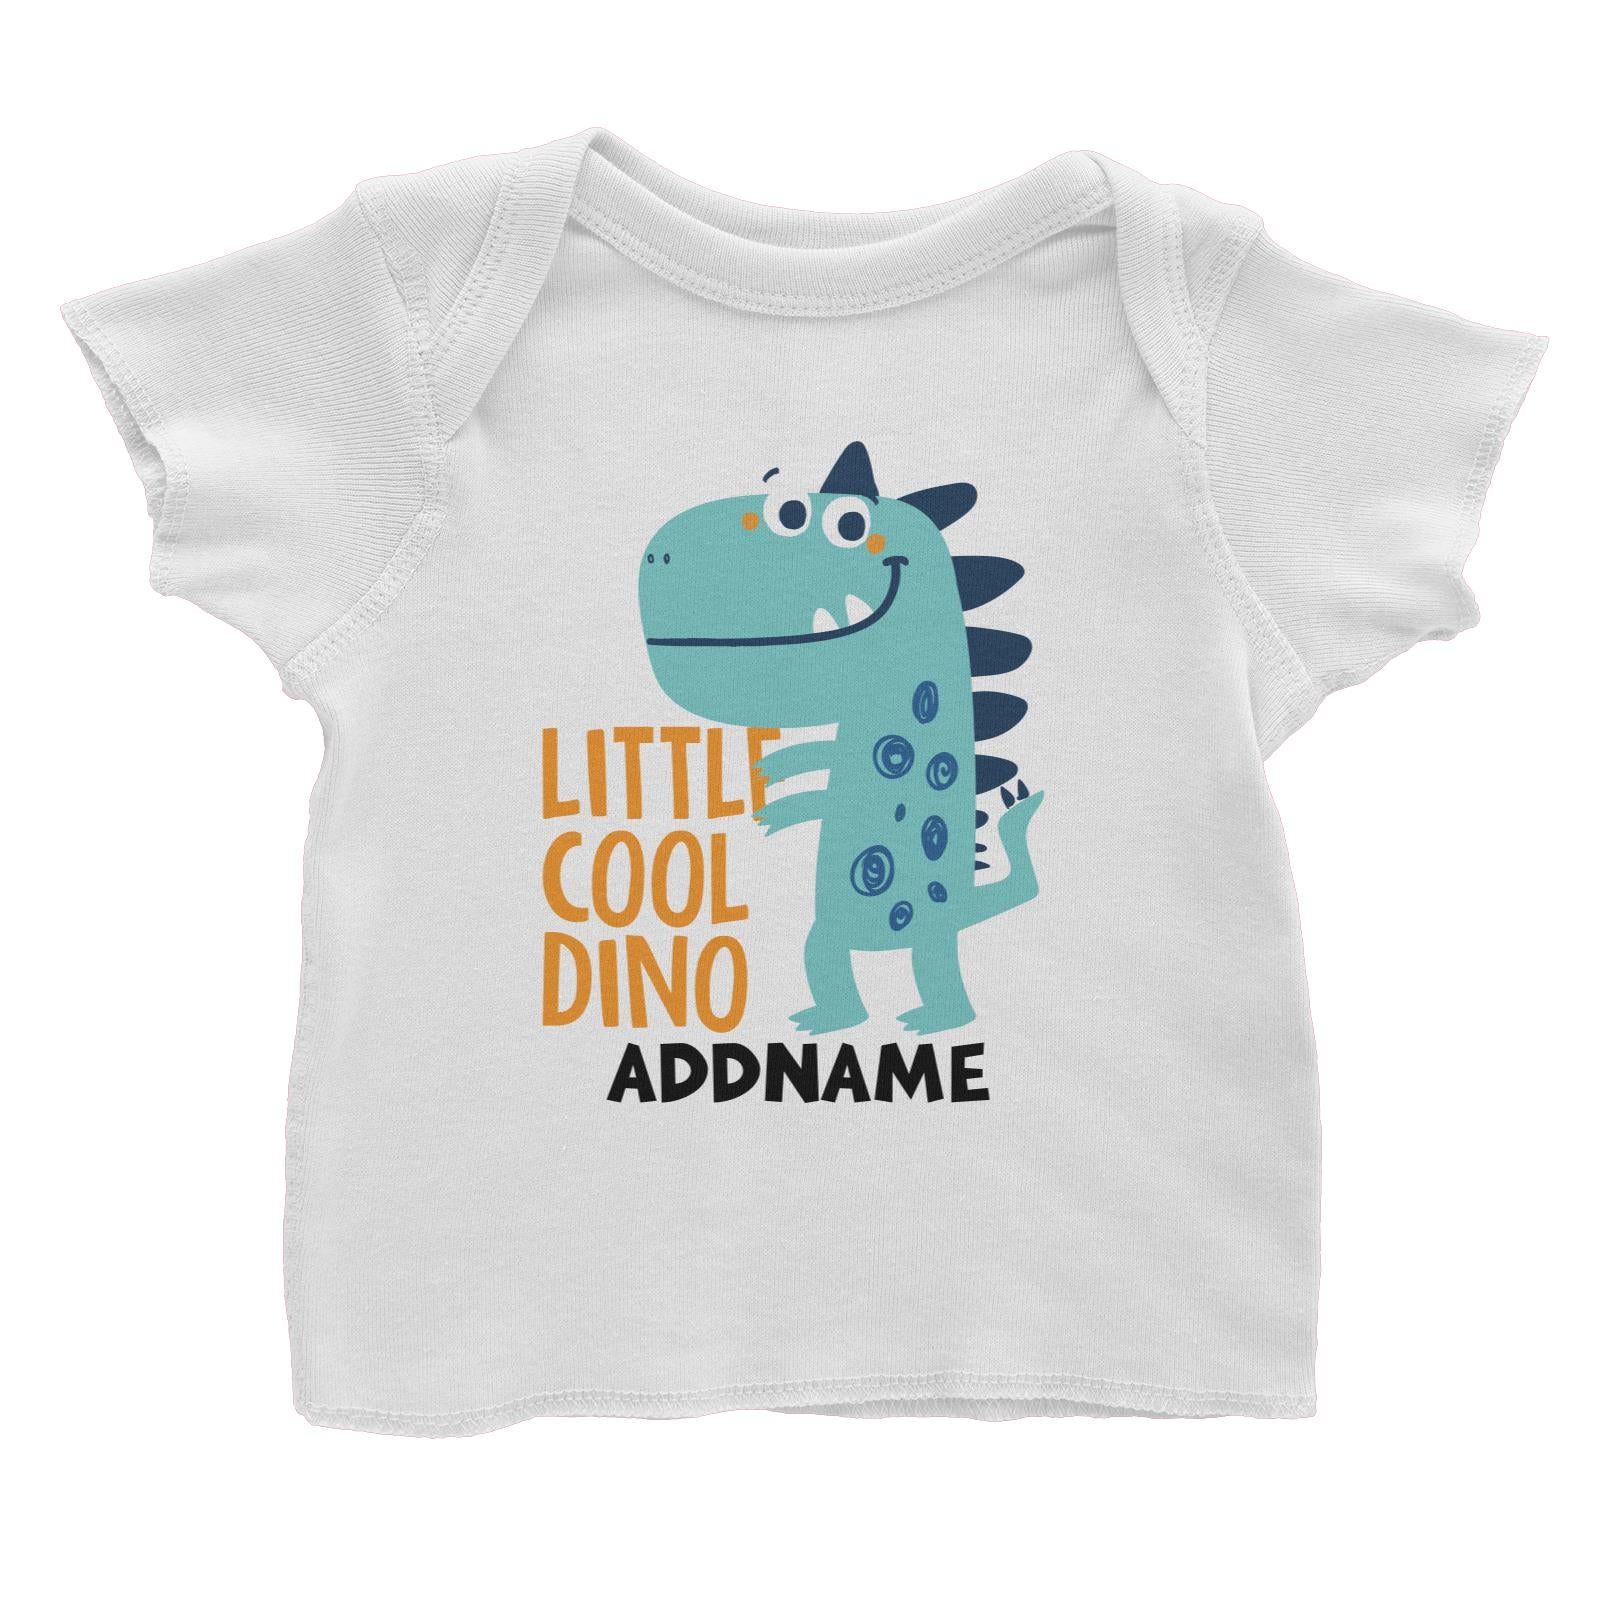 Little Cool Dino Addname Baby T-Shirt